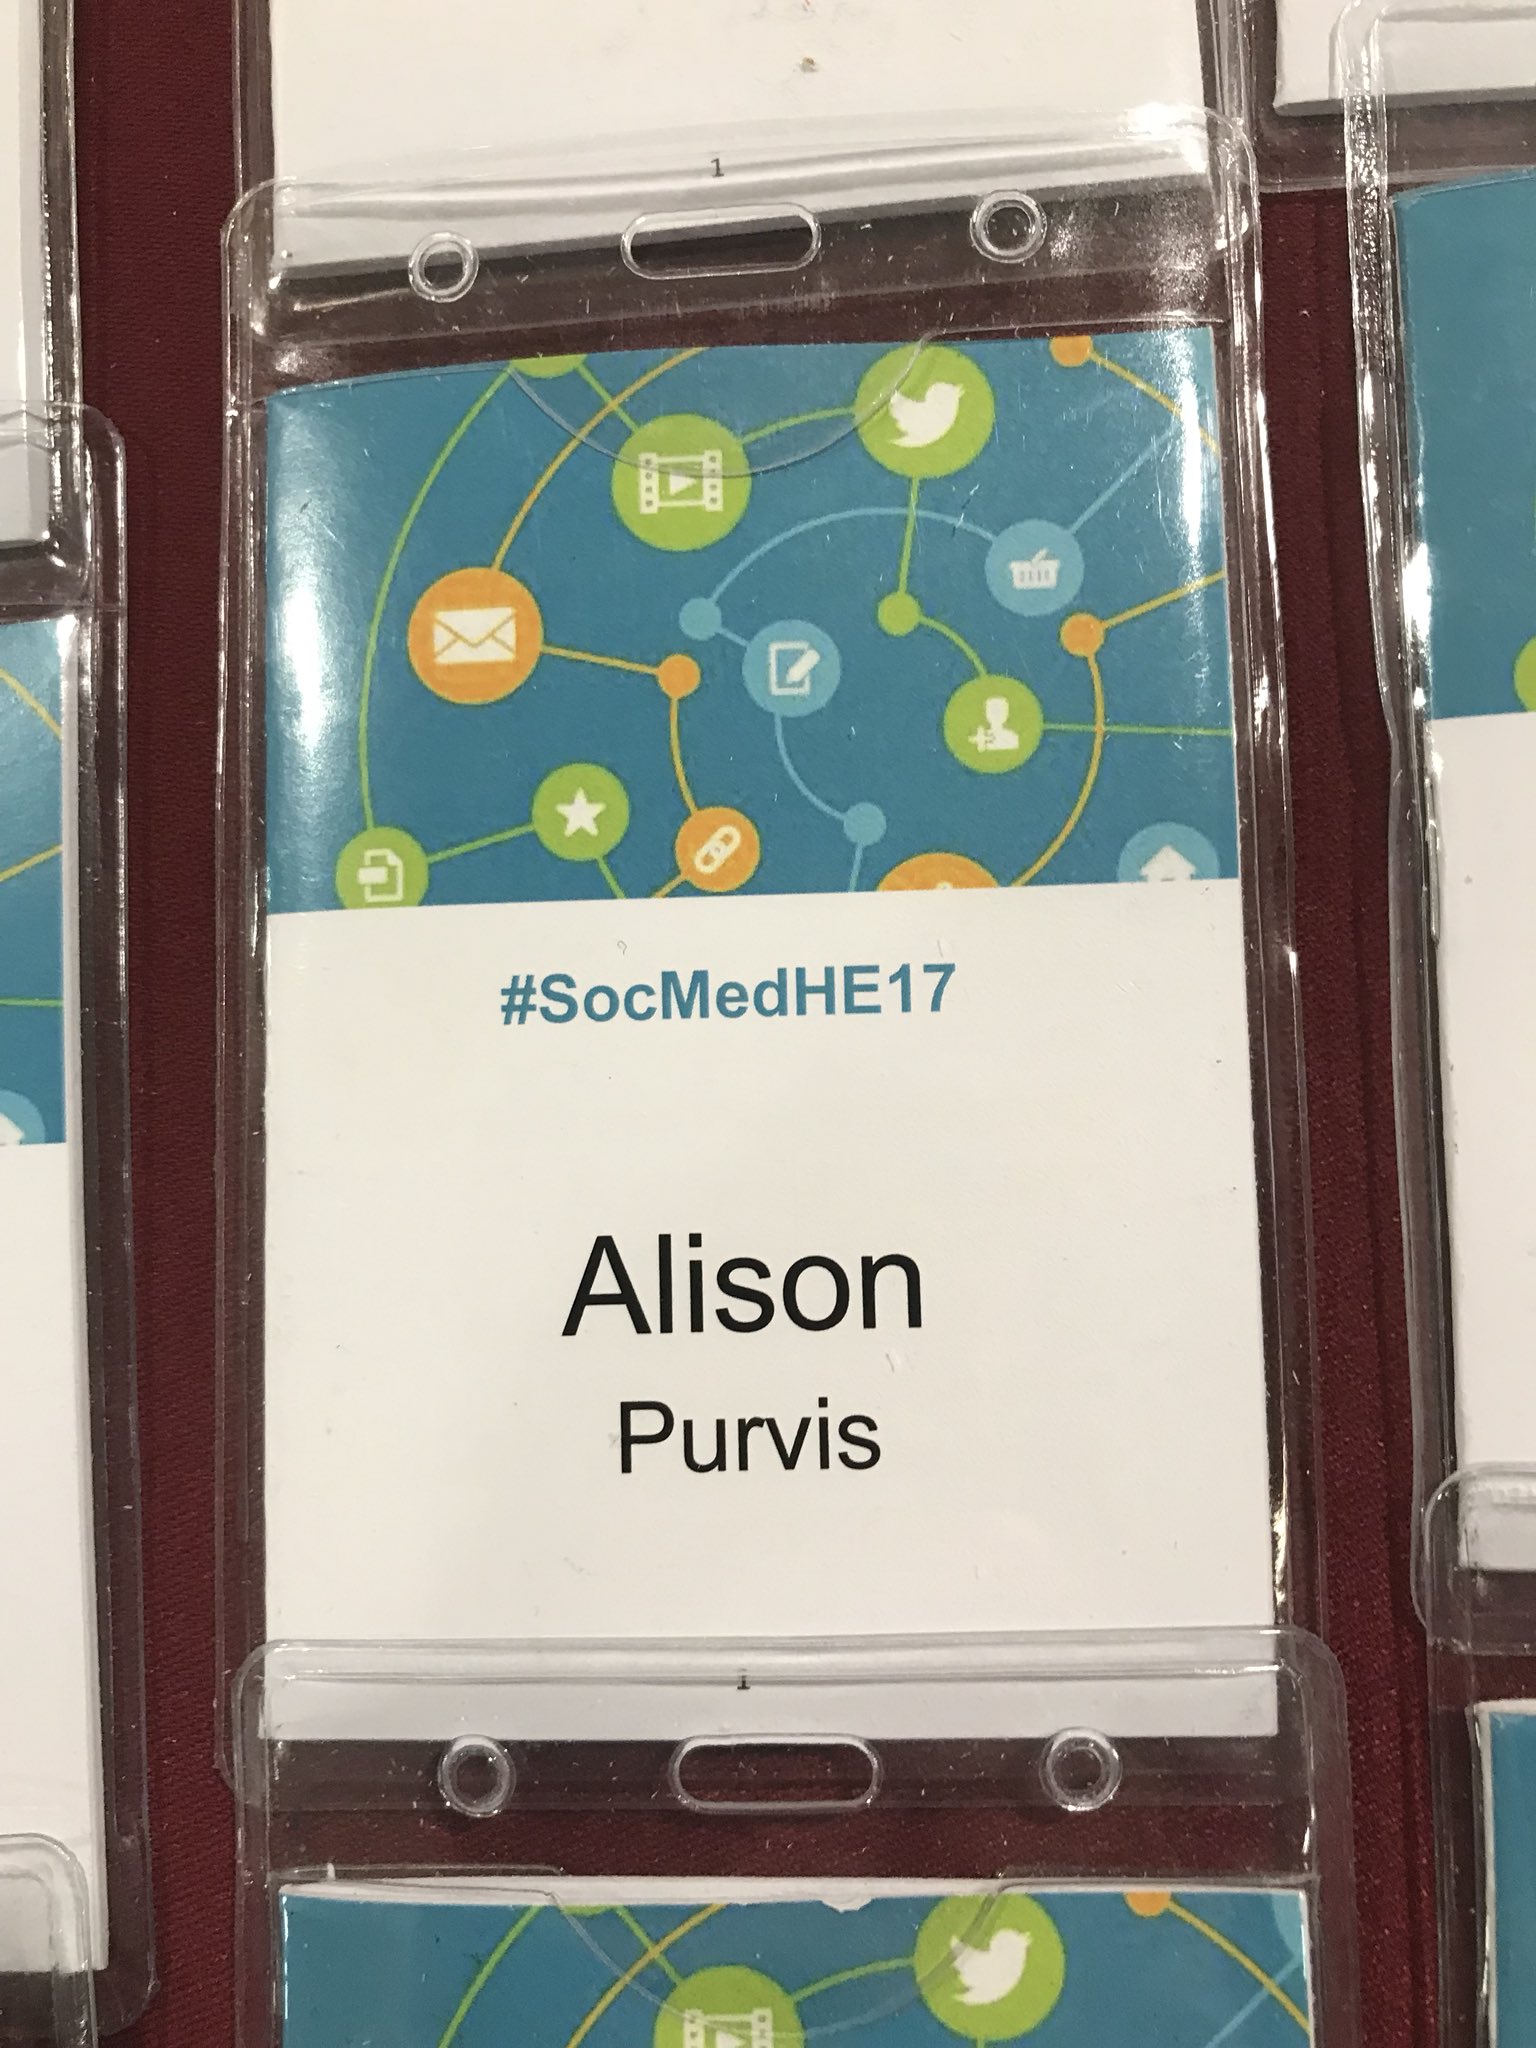 ‘Twas the night before #SocMedHE17 when all thro’ Charles Street Building. Not a creature was stirring, not even a tweet; The badges were all neatly laid out with care. In hopes that St. Nicholas soon would be there 🤓 https://t.co/2uzePlWCH9